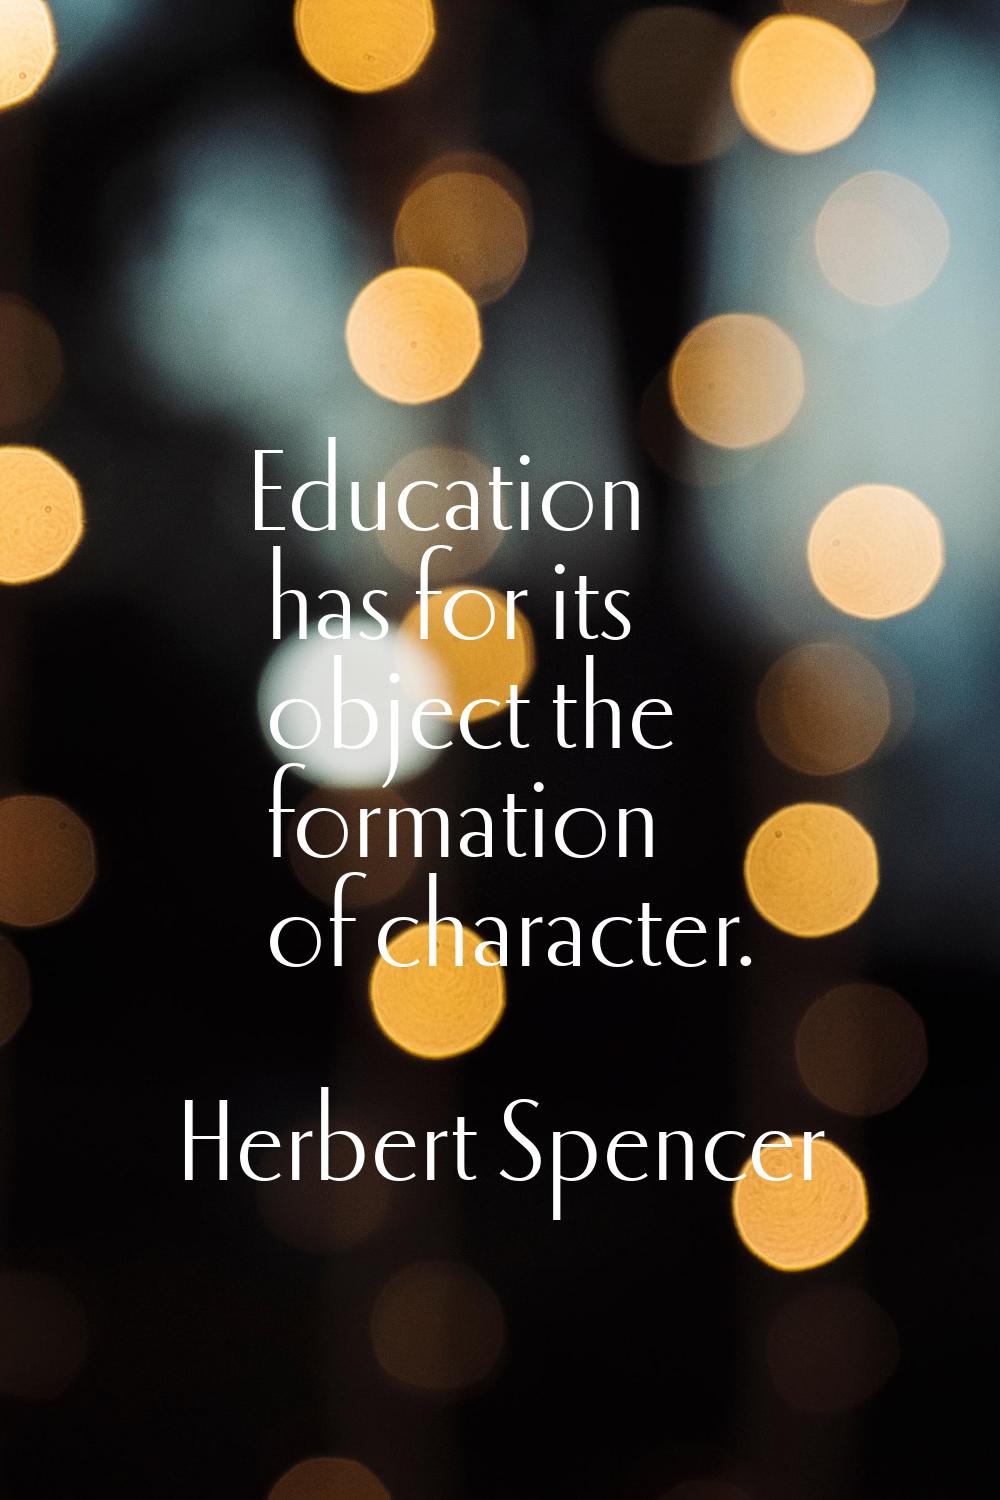 Education has for its object the formation of character.